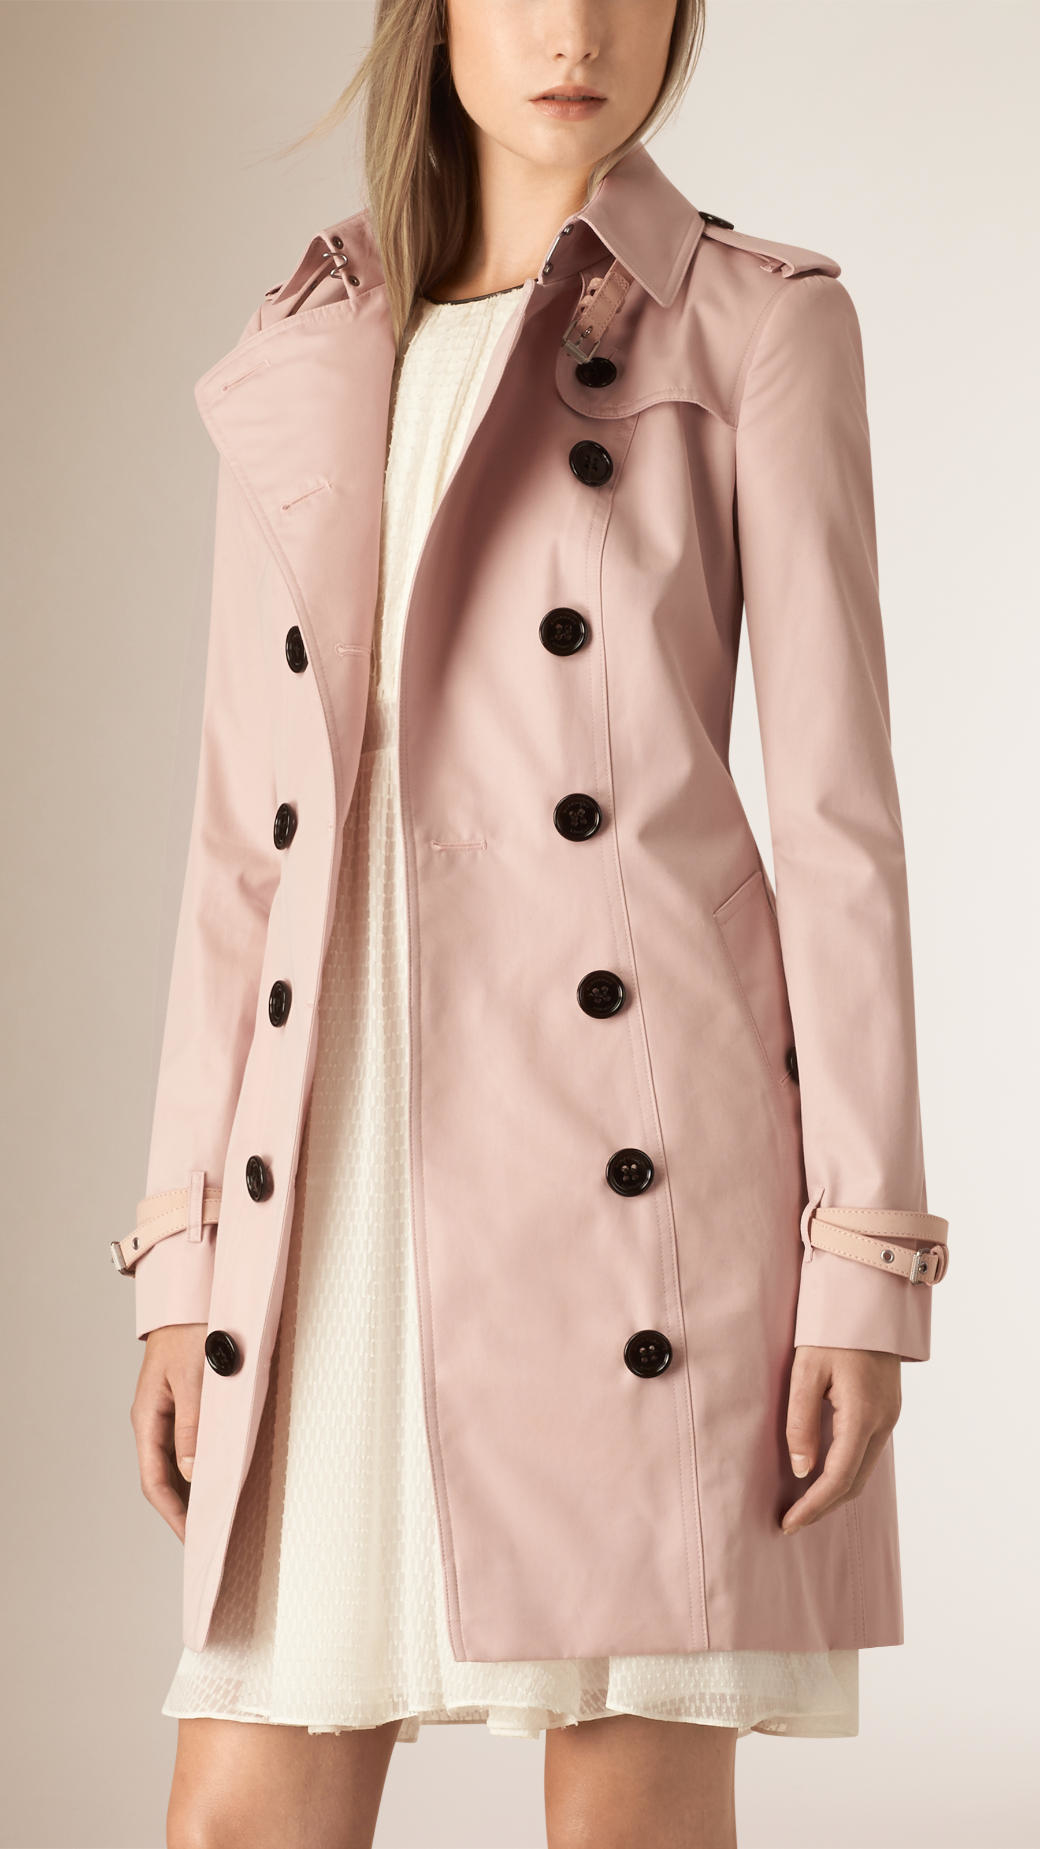 Burberry Leather Trim Cotton Gabardine Trench Coat in Pink | Lyst